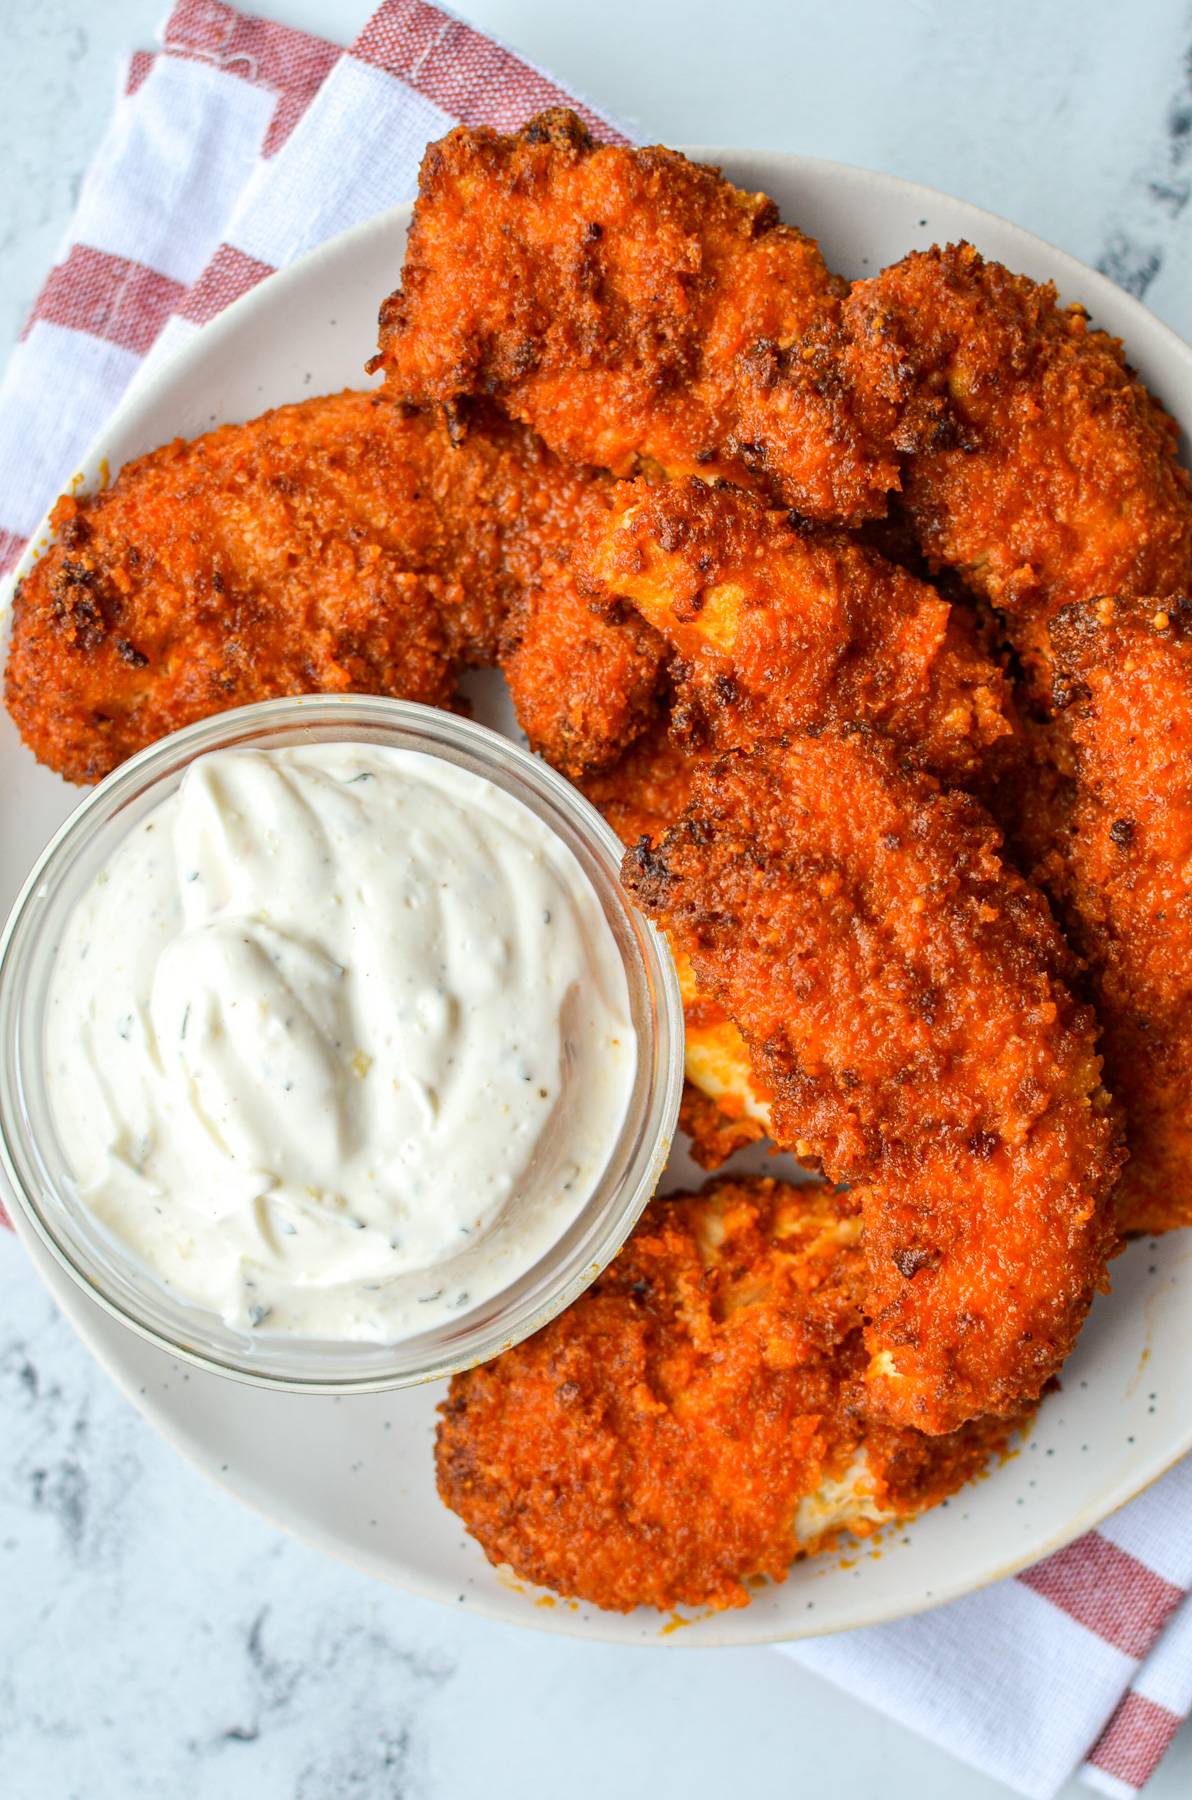 A plate of buffalo chicken tenders with a small bowl of ranch dip.